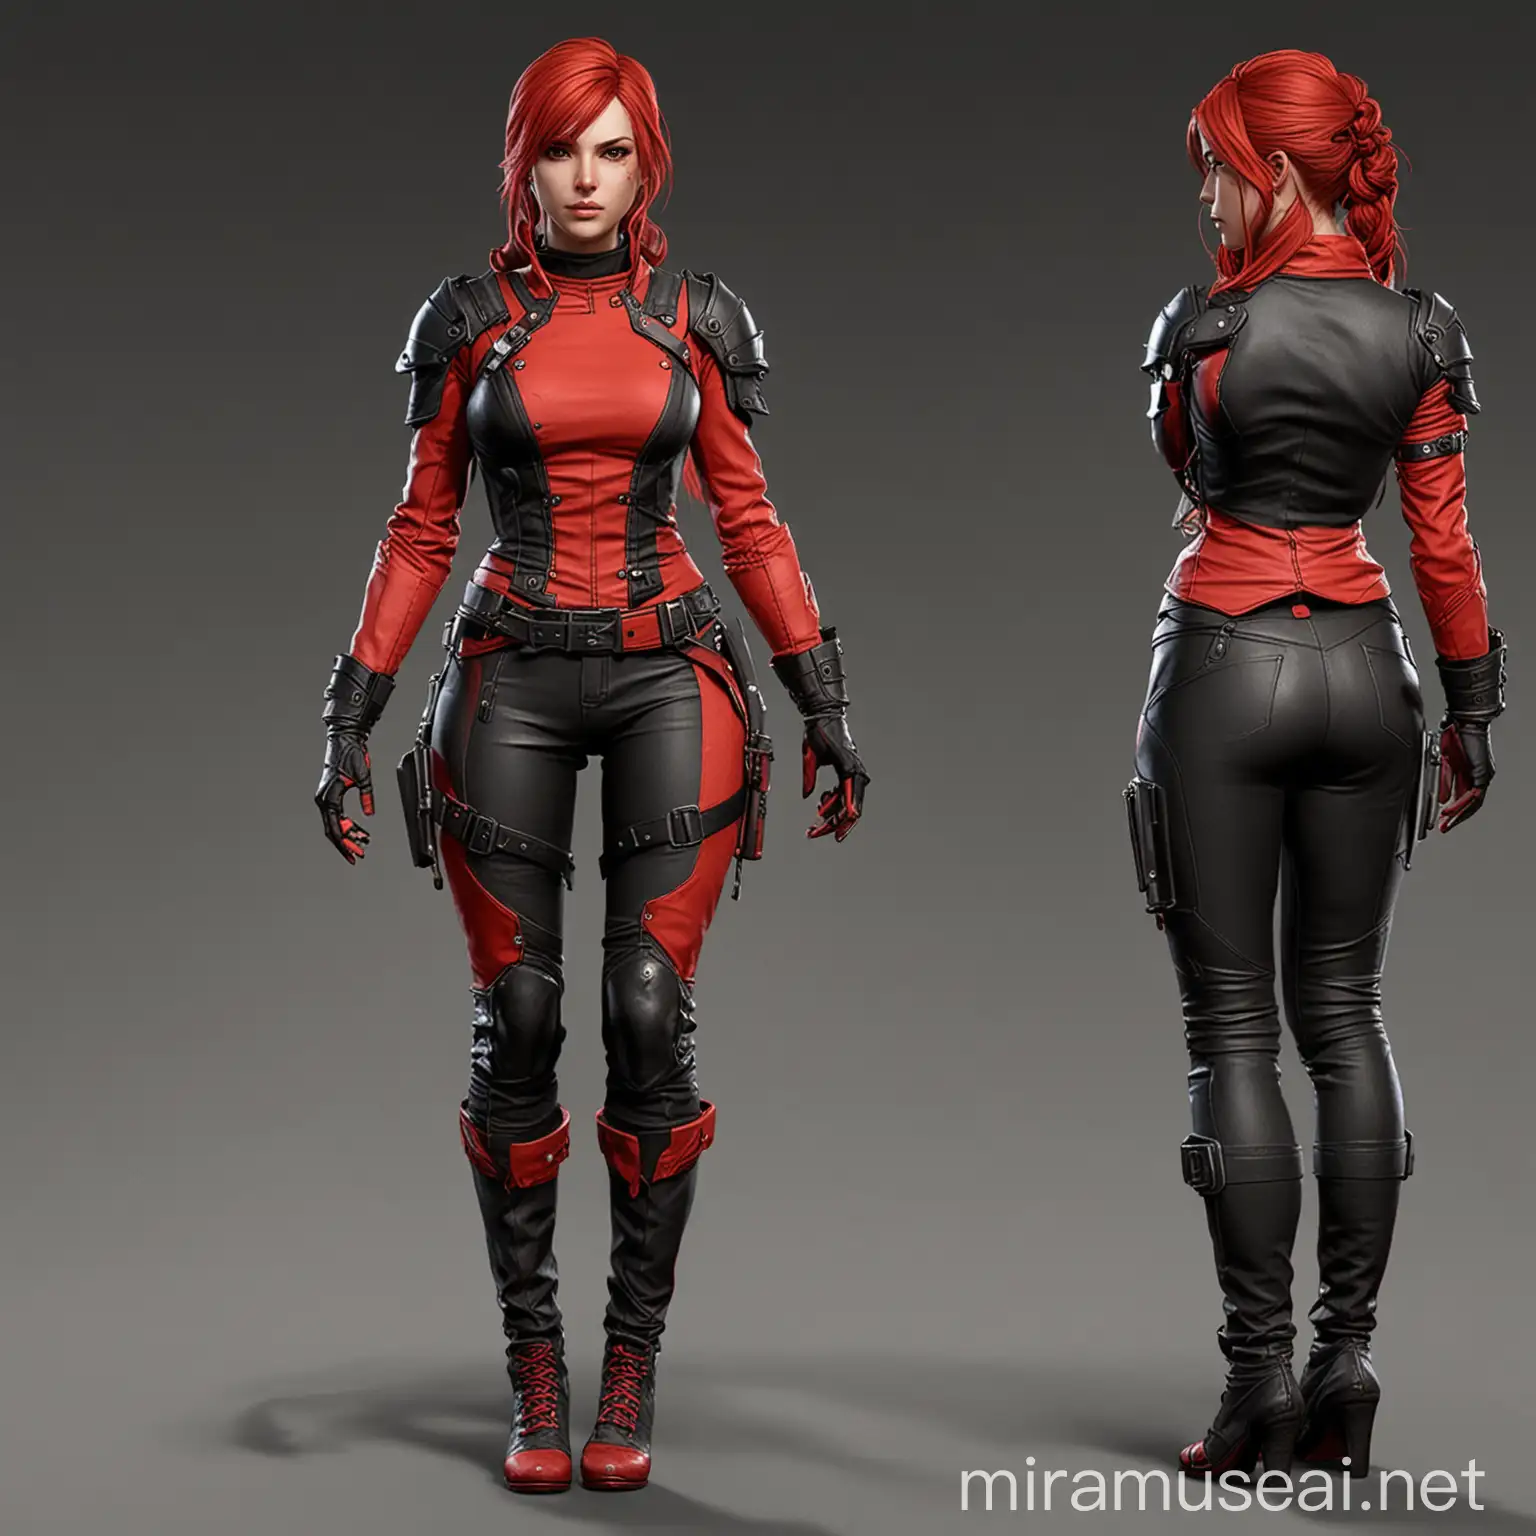 Design a female game outfit color is red and black